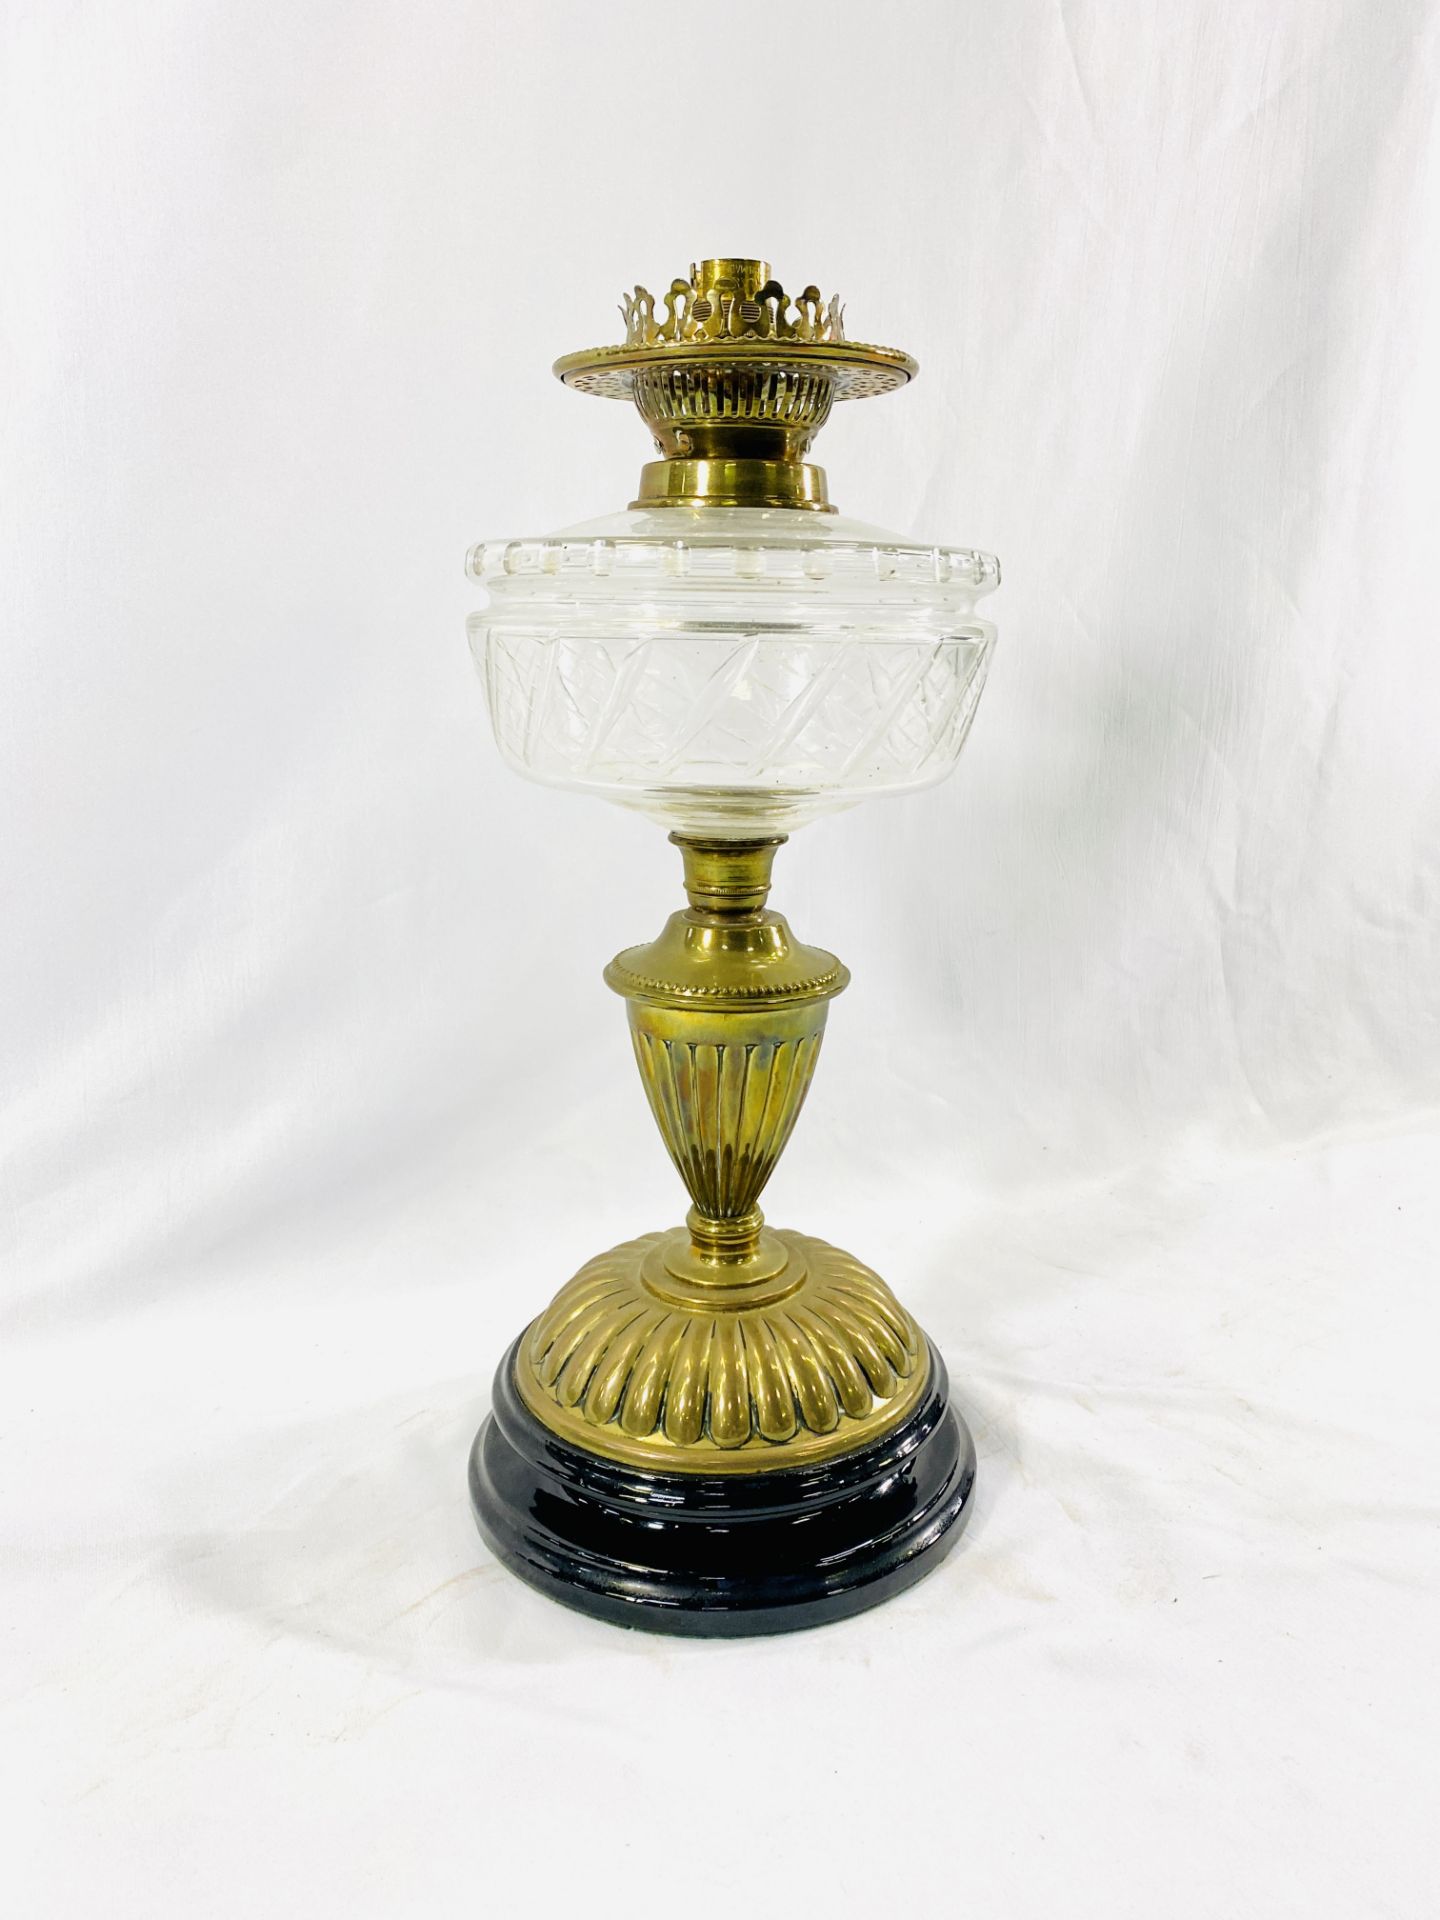 Brass electric lamp - Image 2 of 5